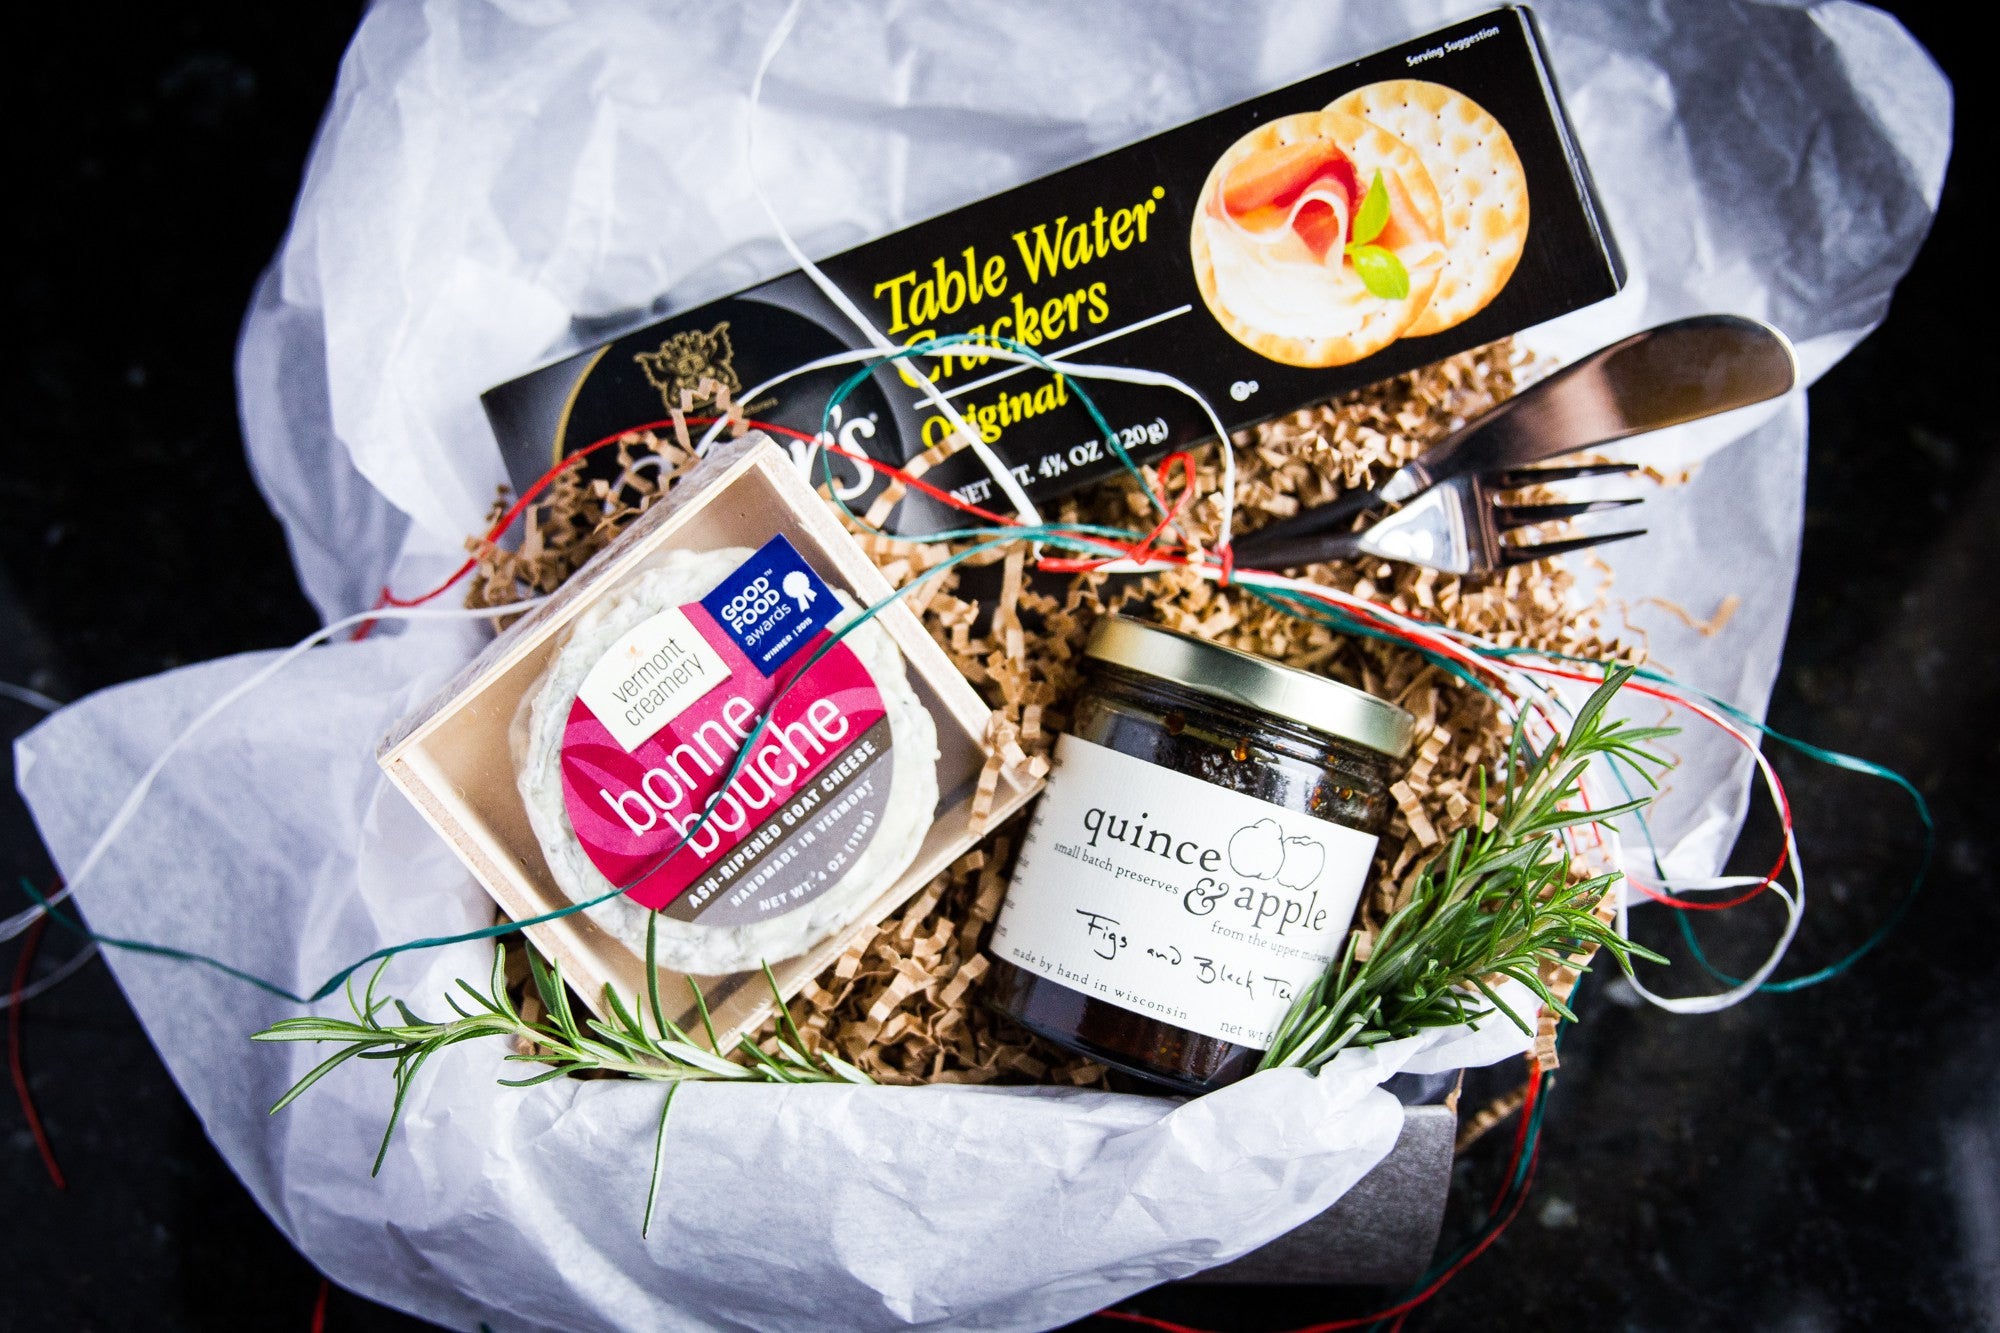 From Cheese Sex Death - DIY Cheese Gift Baskets with Quince and Apple Jams